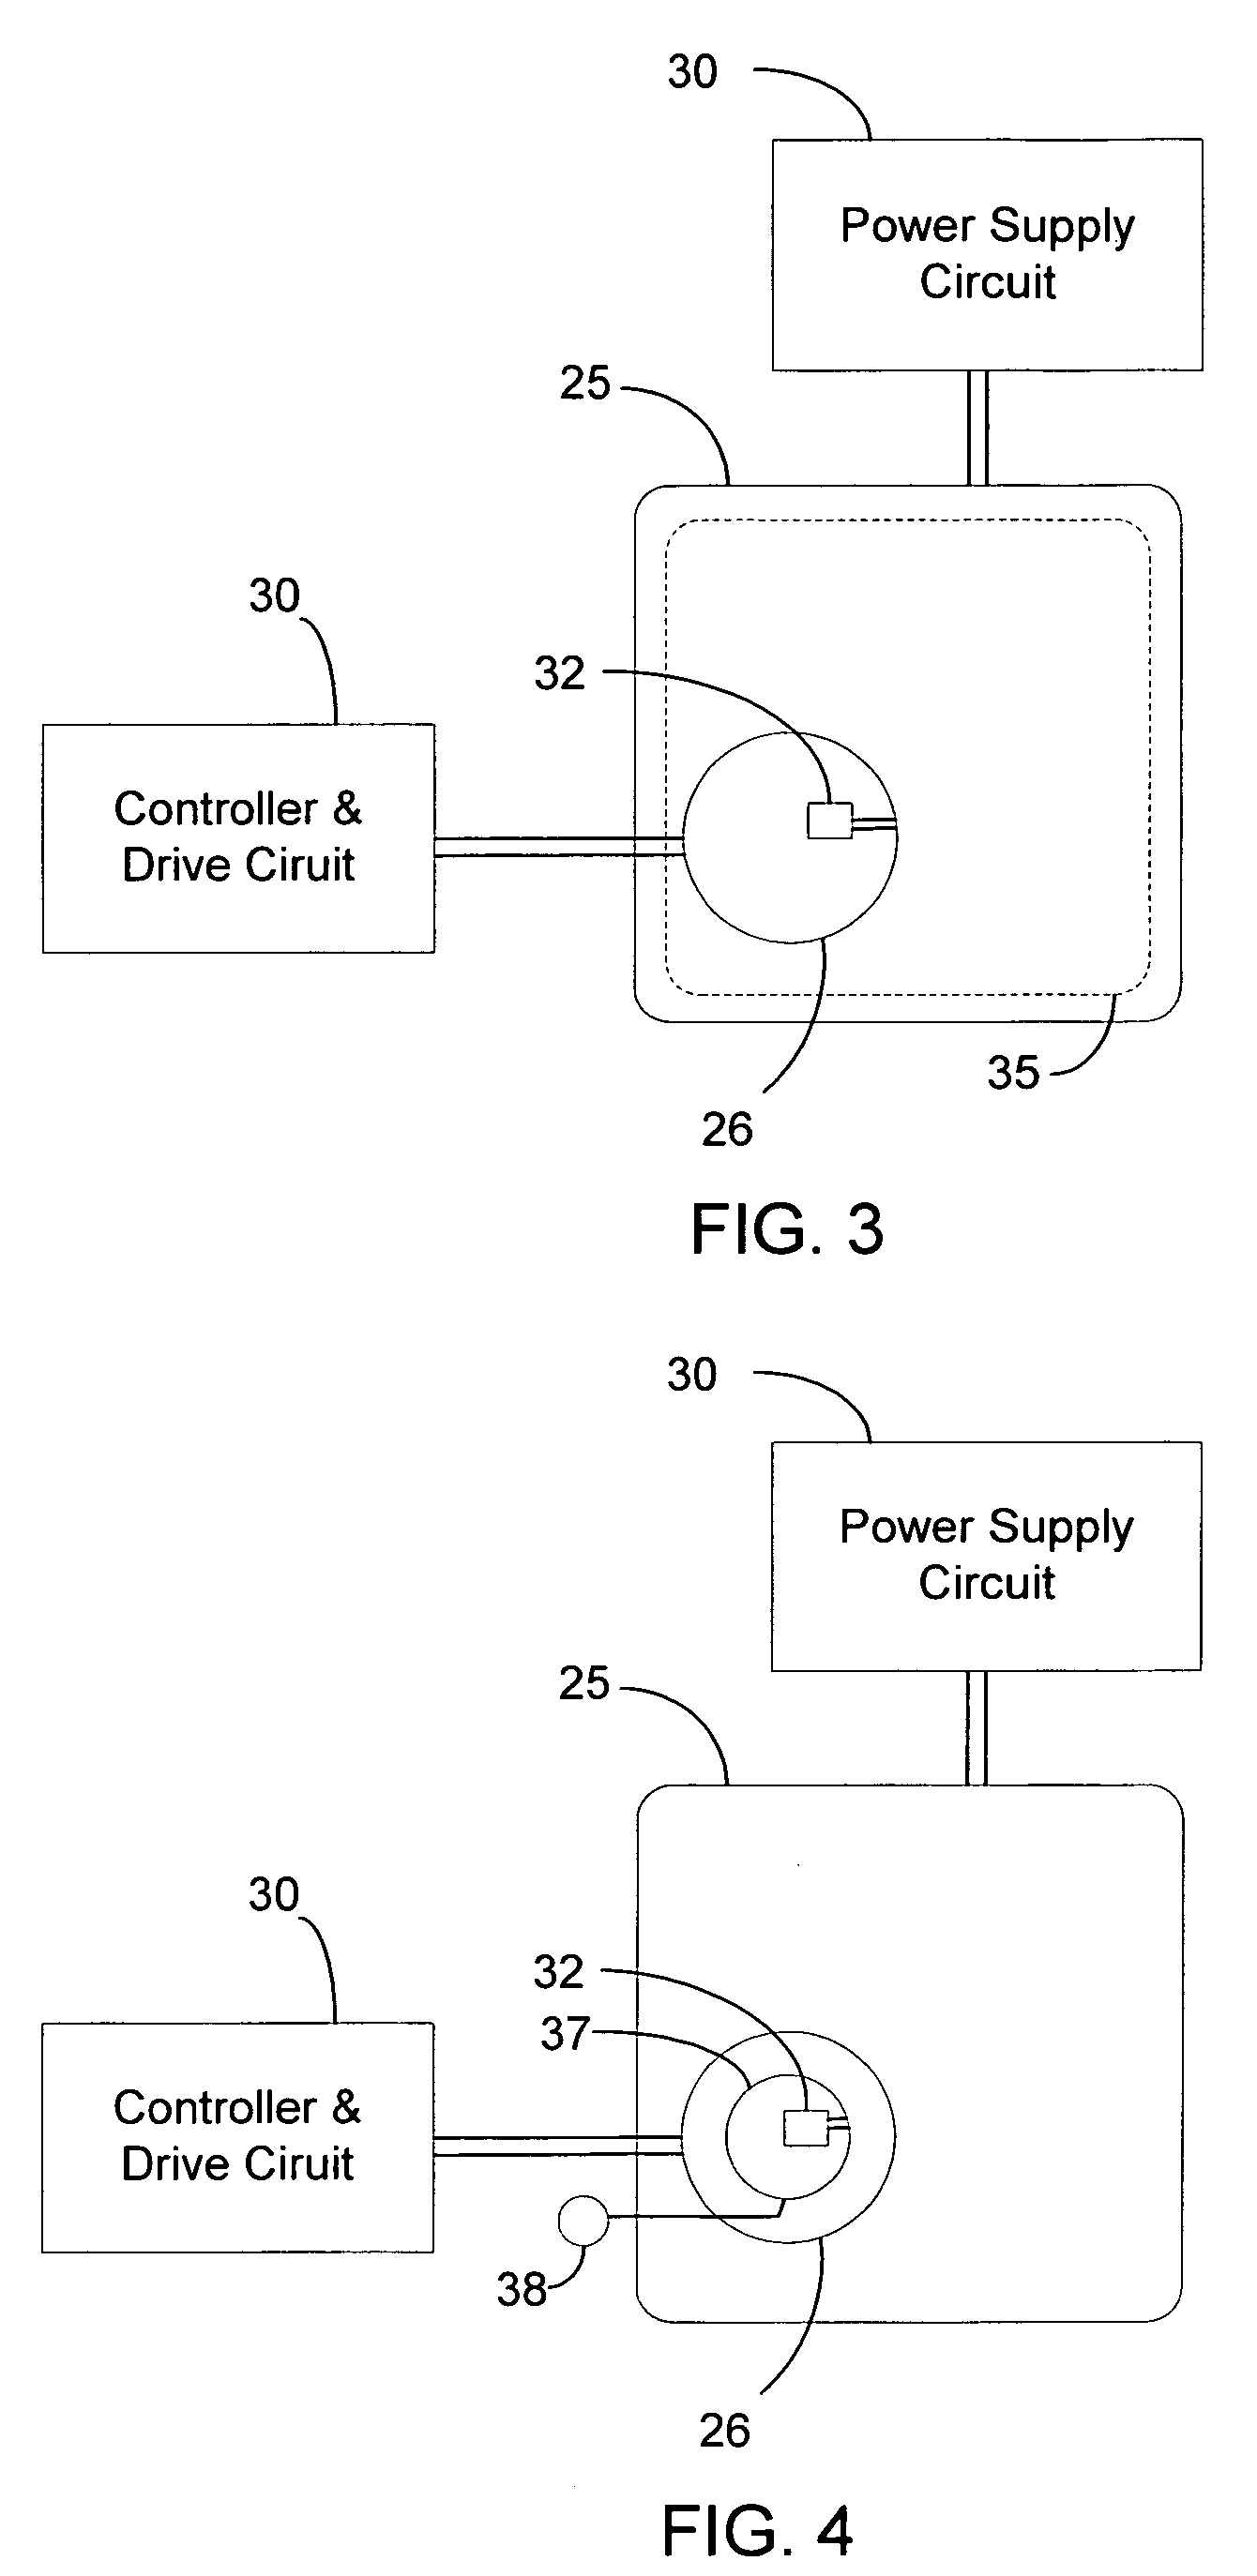 Inductive powering surface for powering portable devices